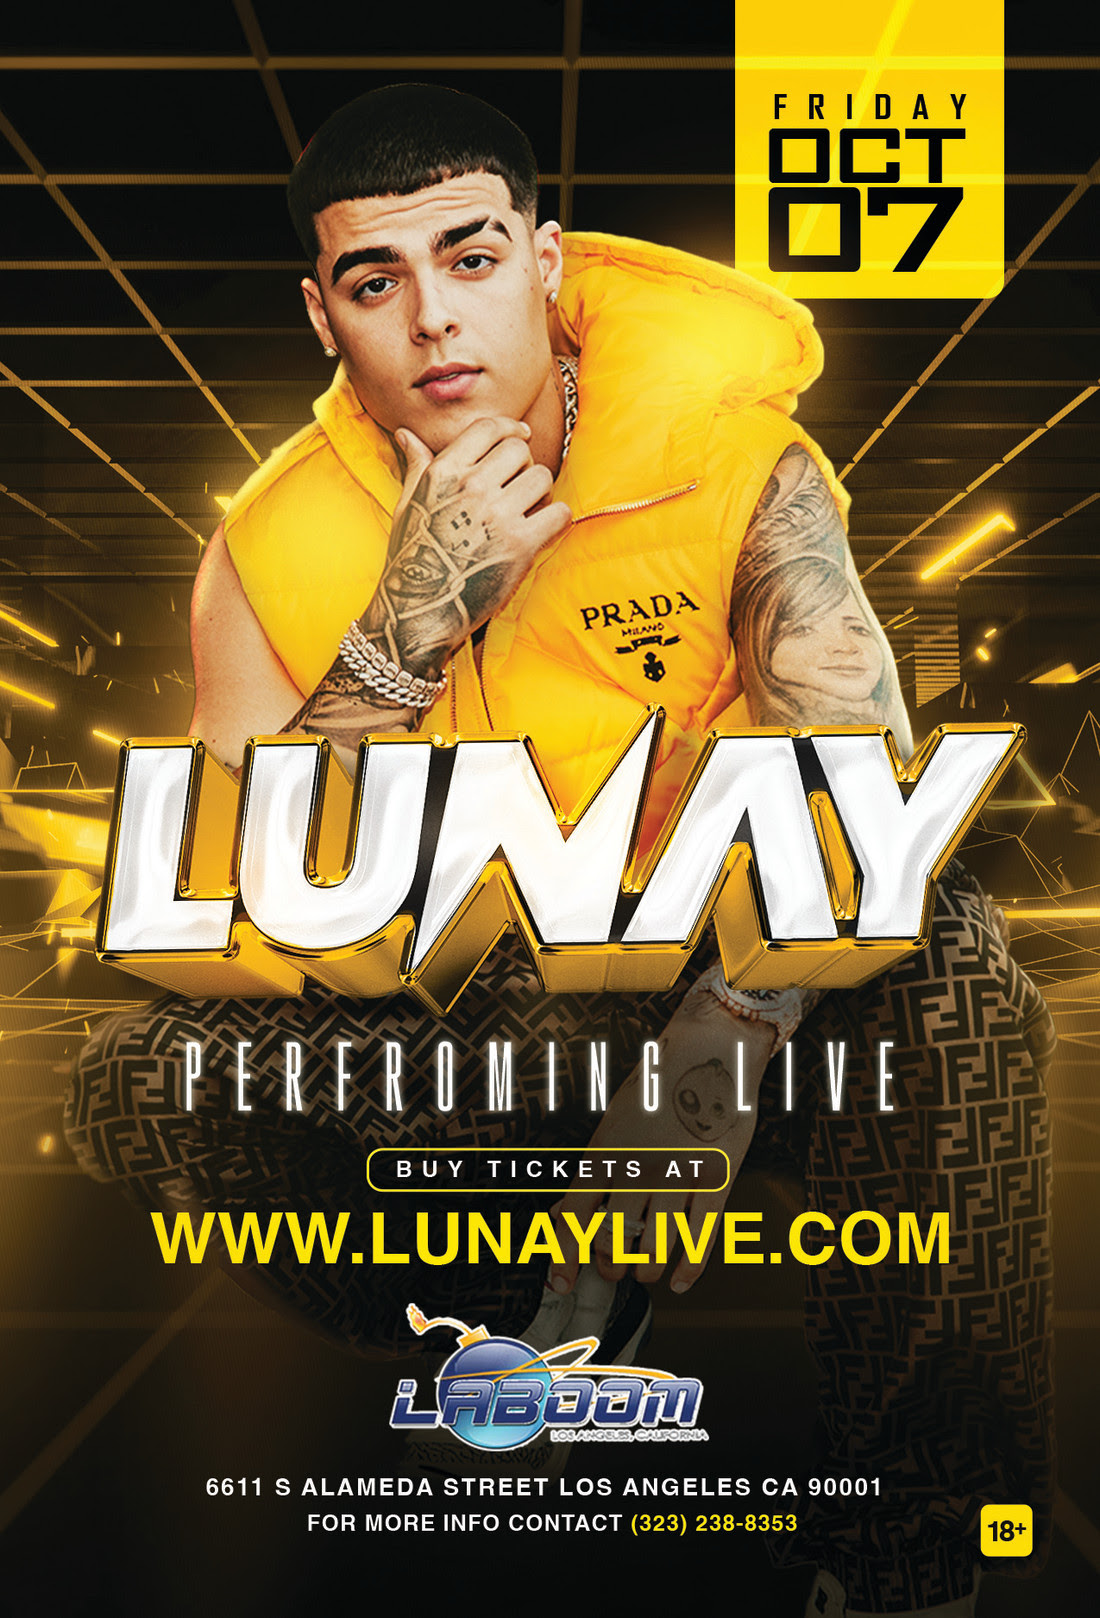 LUNAY this Friday Live in Concert!